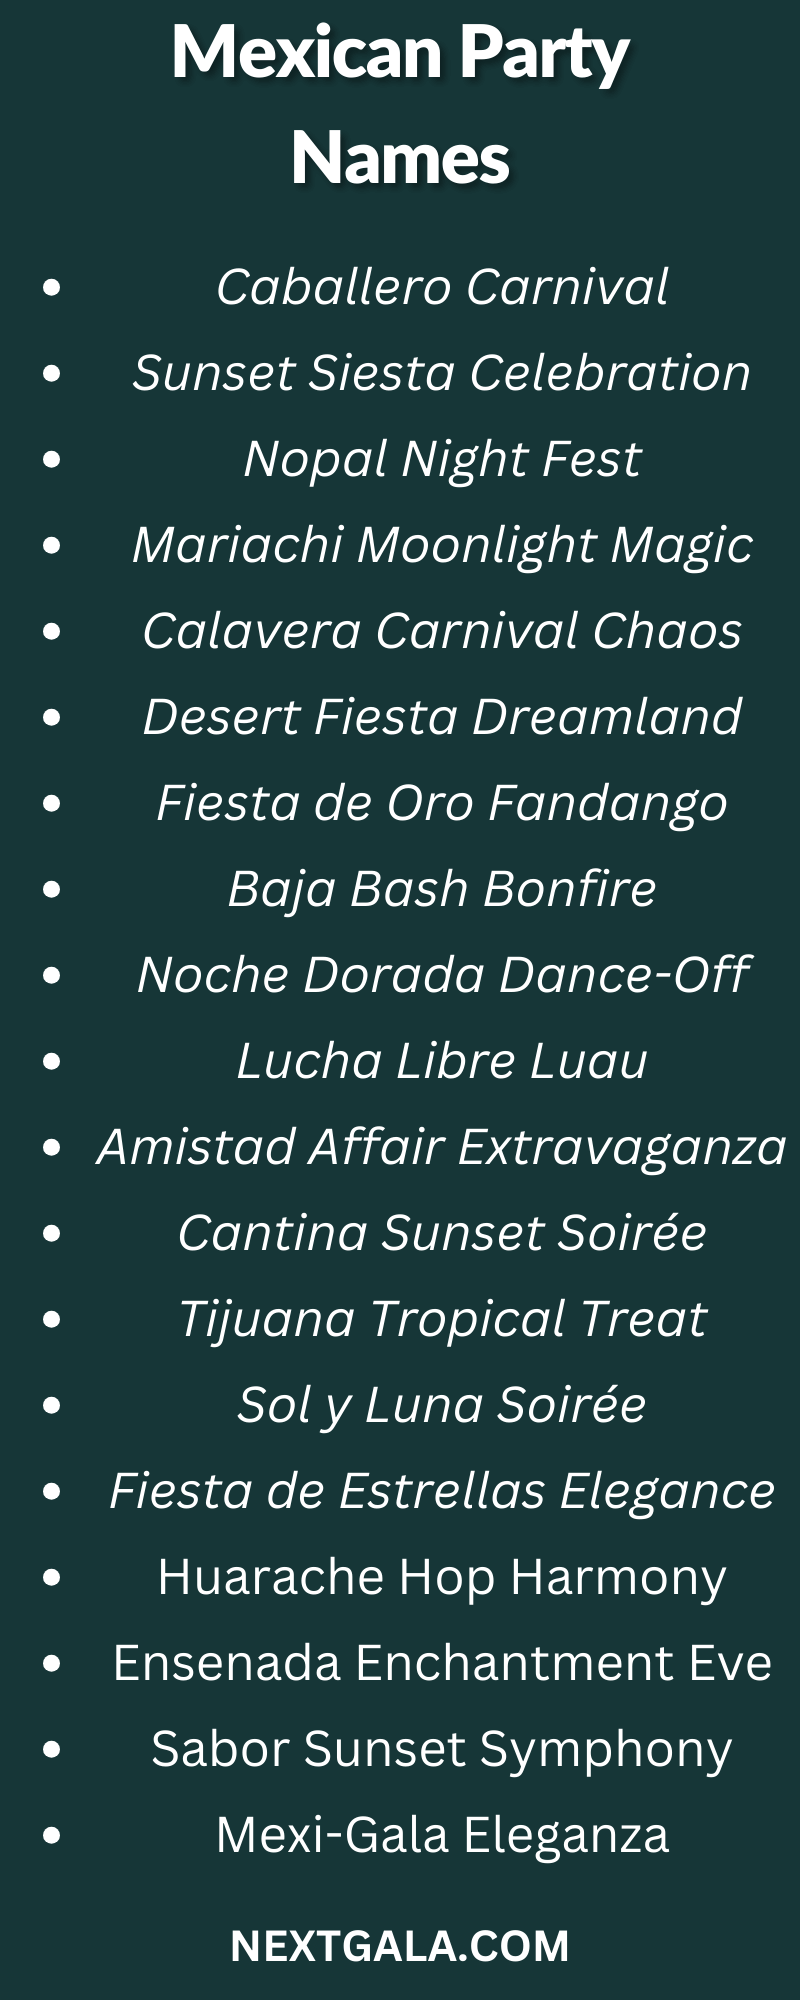 Mexican Party Names